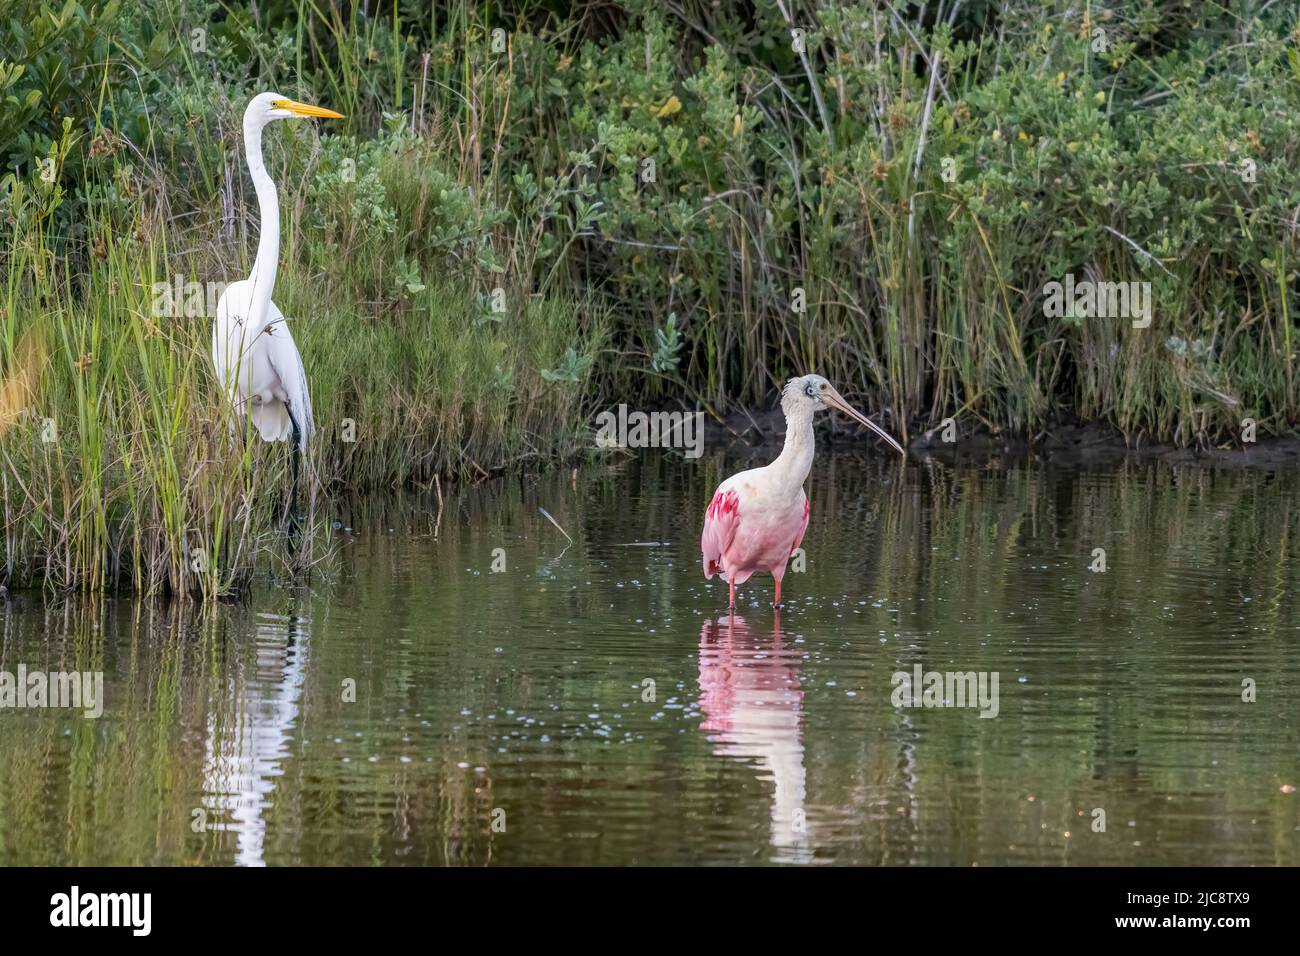 A Great Egret, Ardea alba, shares a wetland marsh with a Roseate Spoonbill in the South Padre Island Birding Center, Texas. Stock Photo